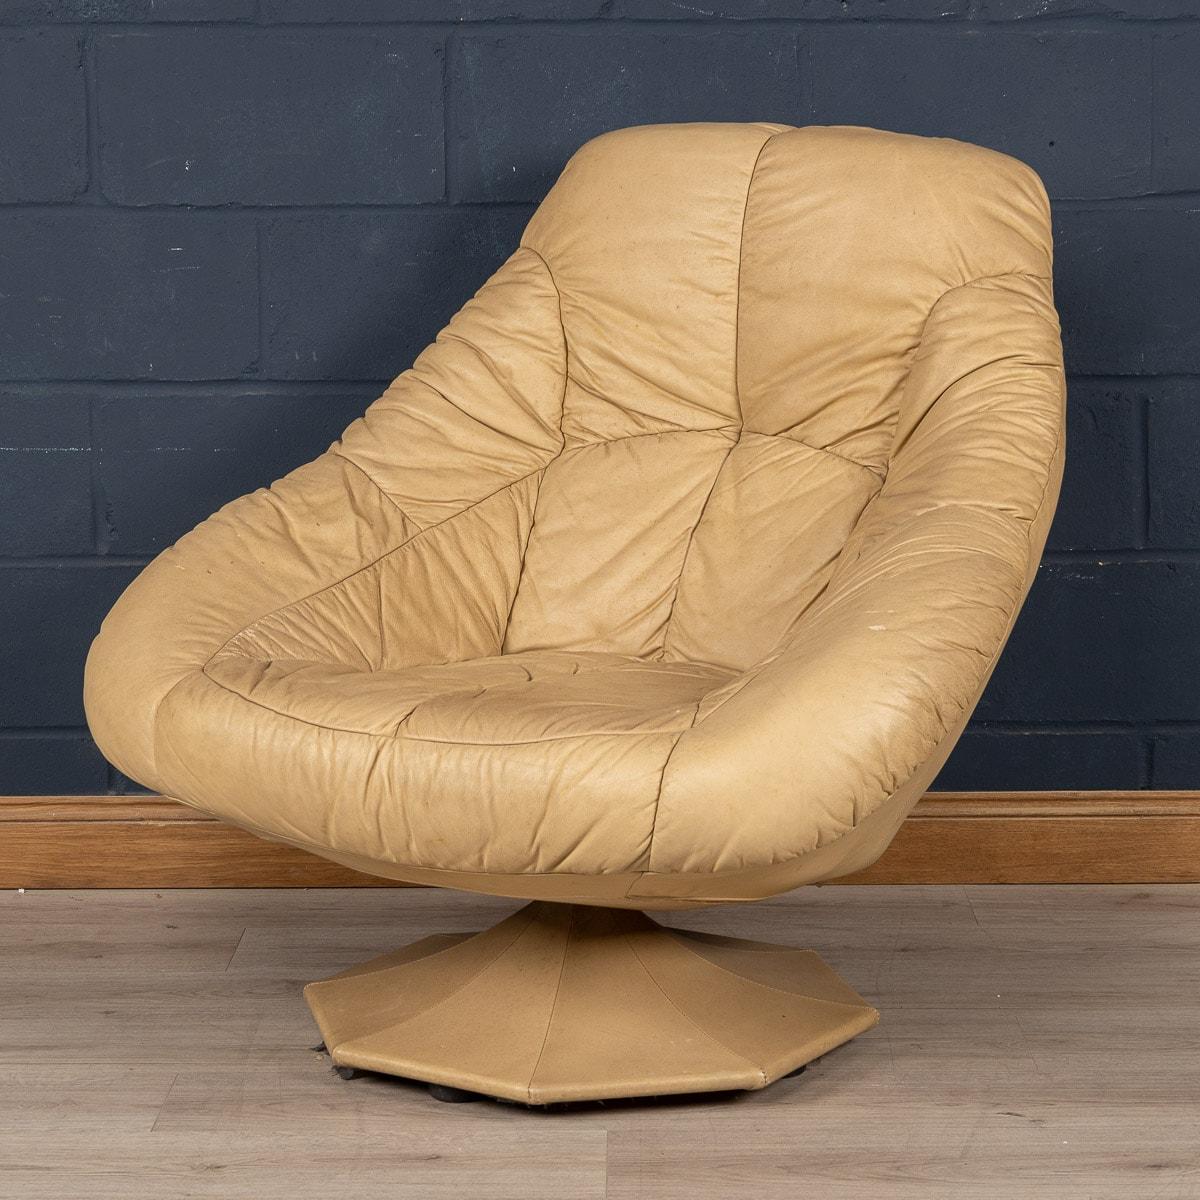 A lovely retro lounge chair realised in cream leather on a cream leather clad pedestal, made in Italy in the 1970s. This extremely comfortable lounge chair has a beautiful retro “space age“ design which was extremely popular in the 1970s and looks